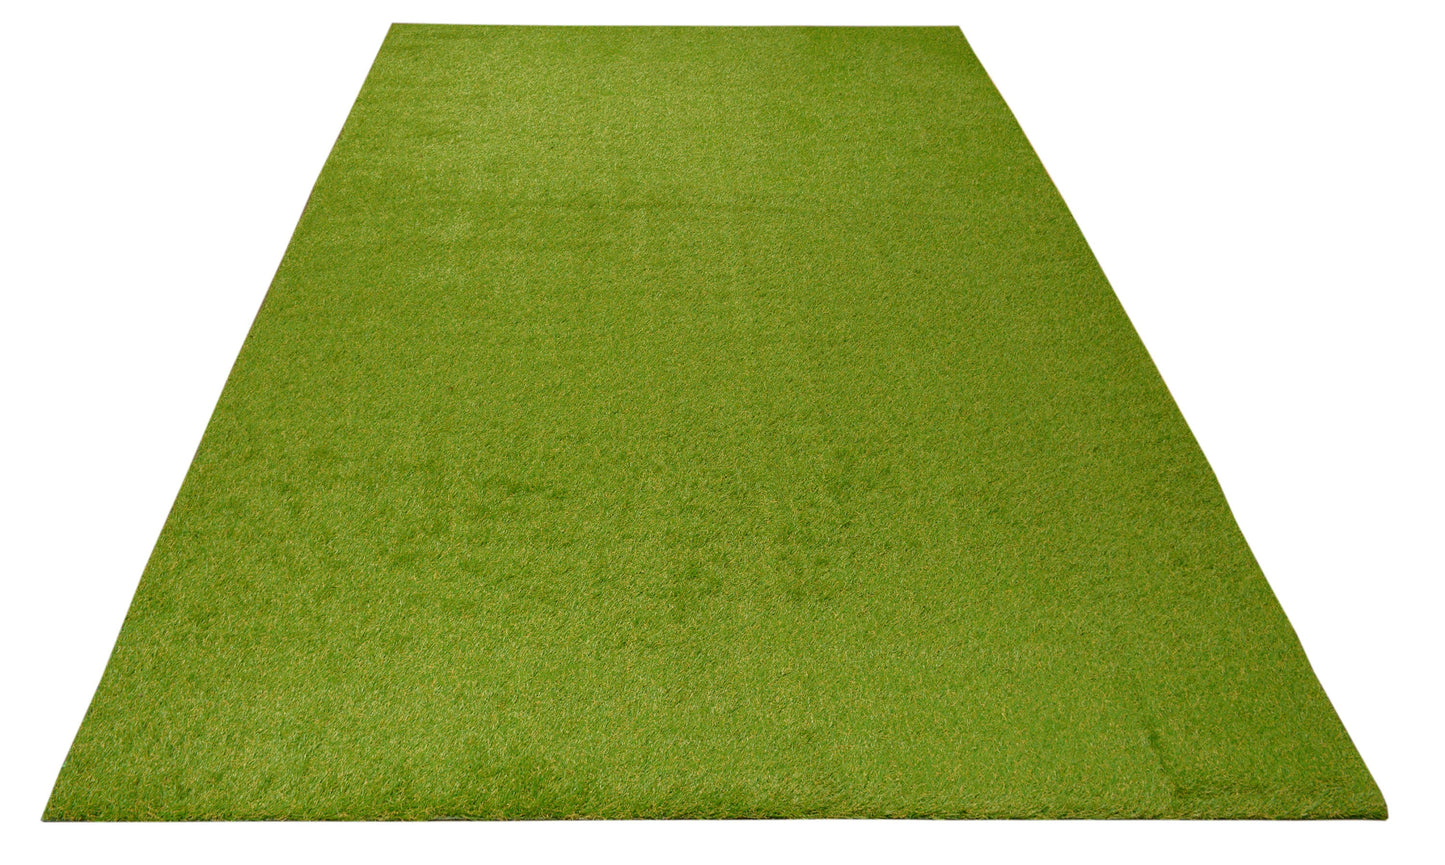 Custom Size Indoor / Outdoor Congrass Natural Look Turf Grass Runner Rug Carpet With Water Hole UV Protected Customize Turf Rug 79" Width